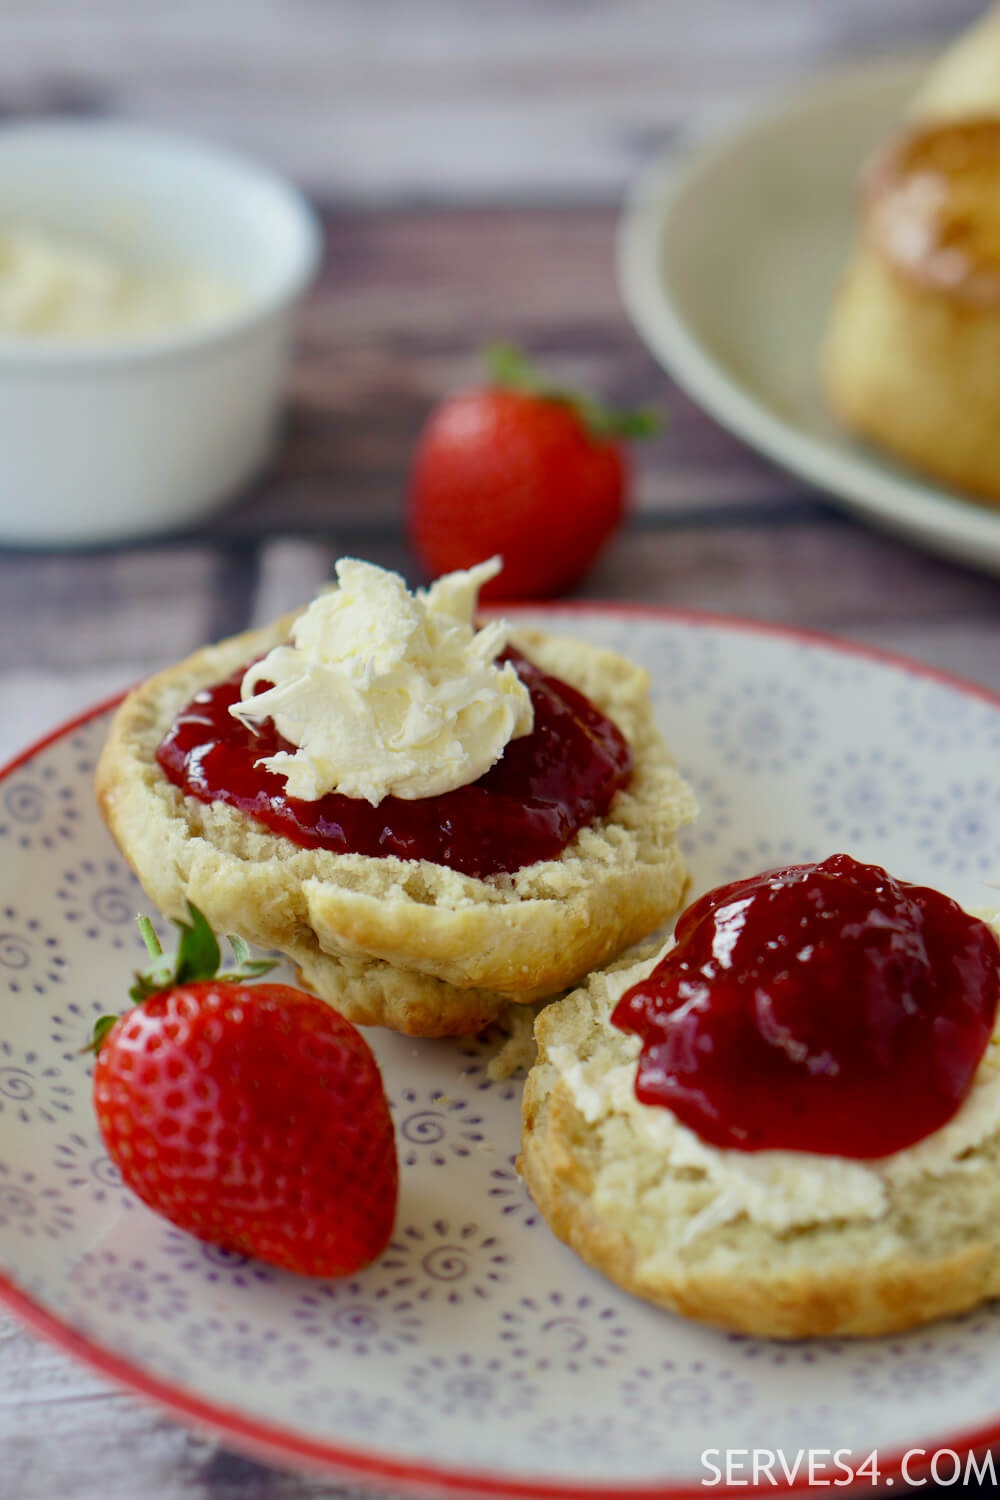 This easy recipe for scones comes together very quickly, meaning you'll have more time to enjoy them!